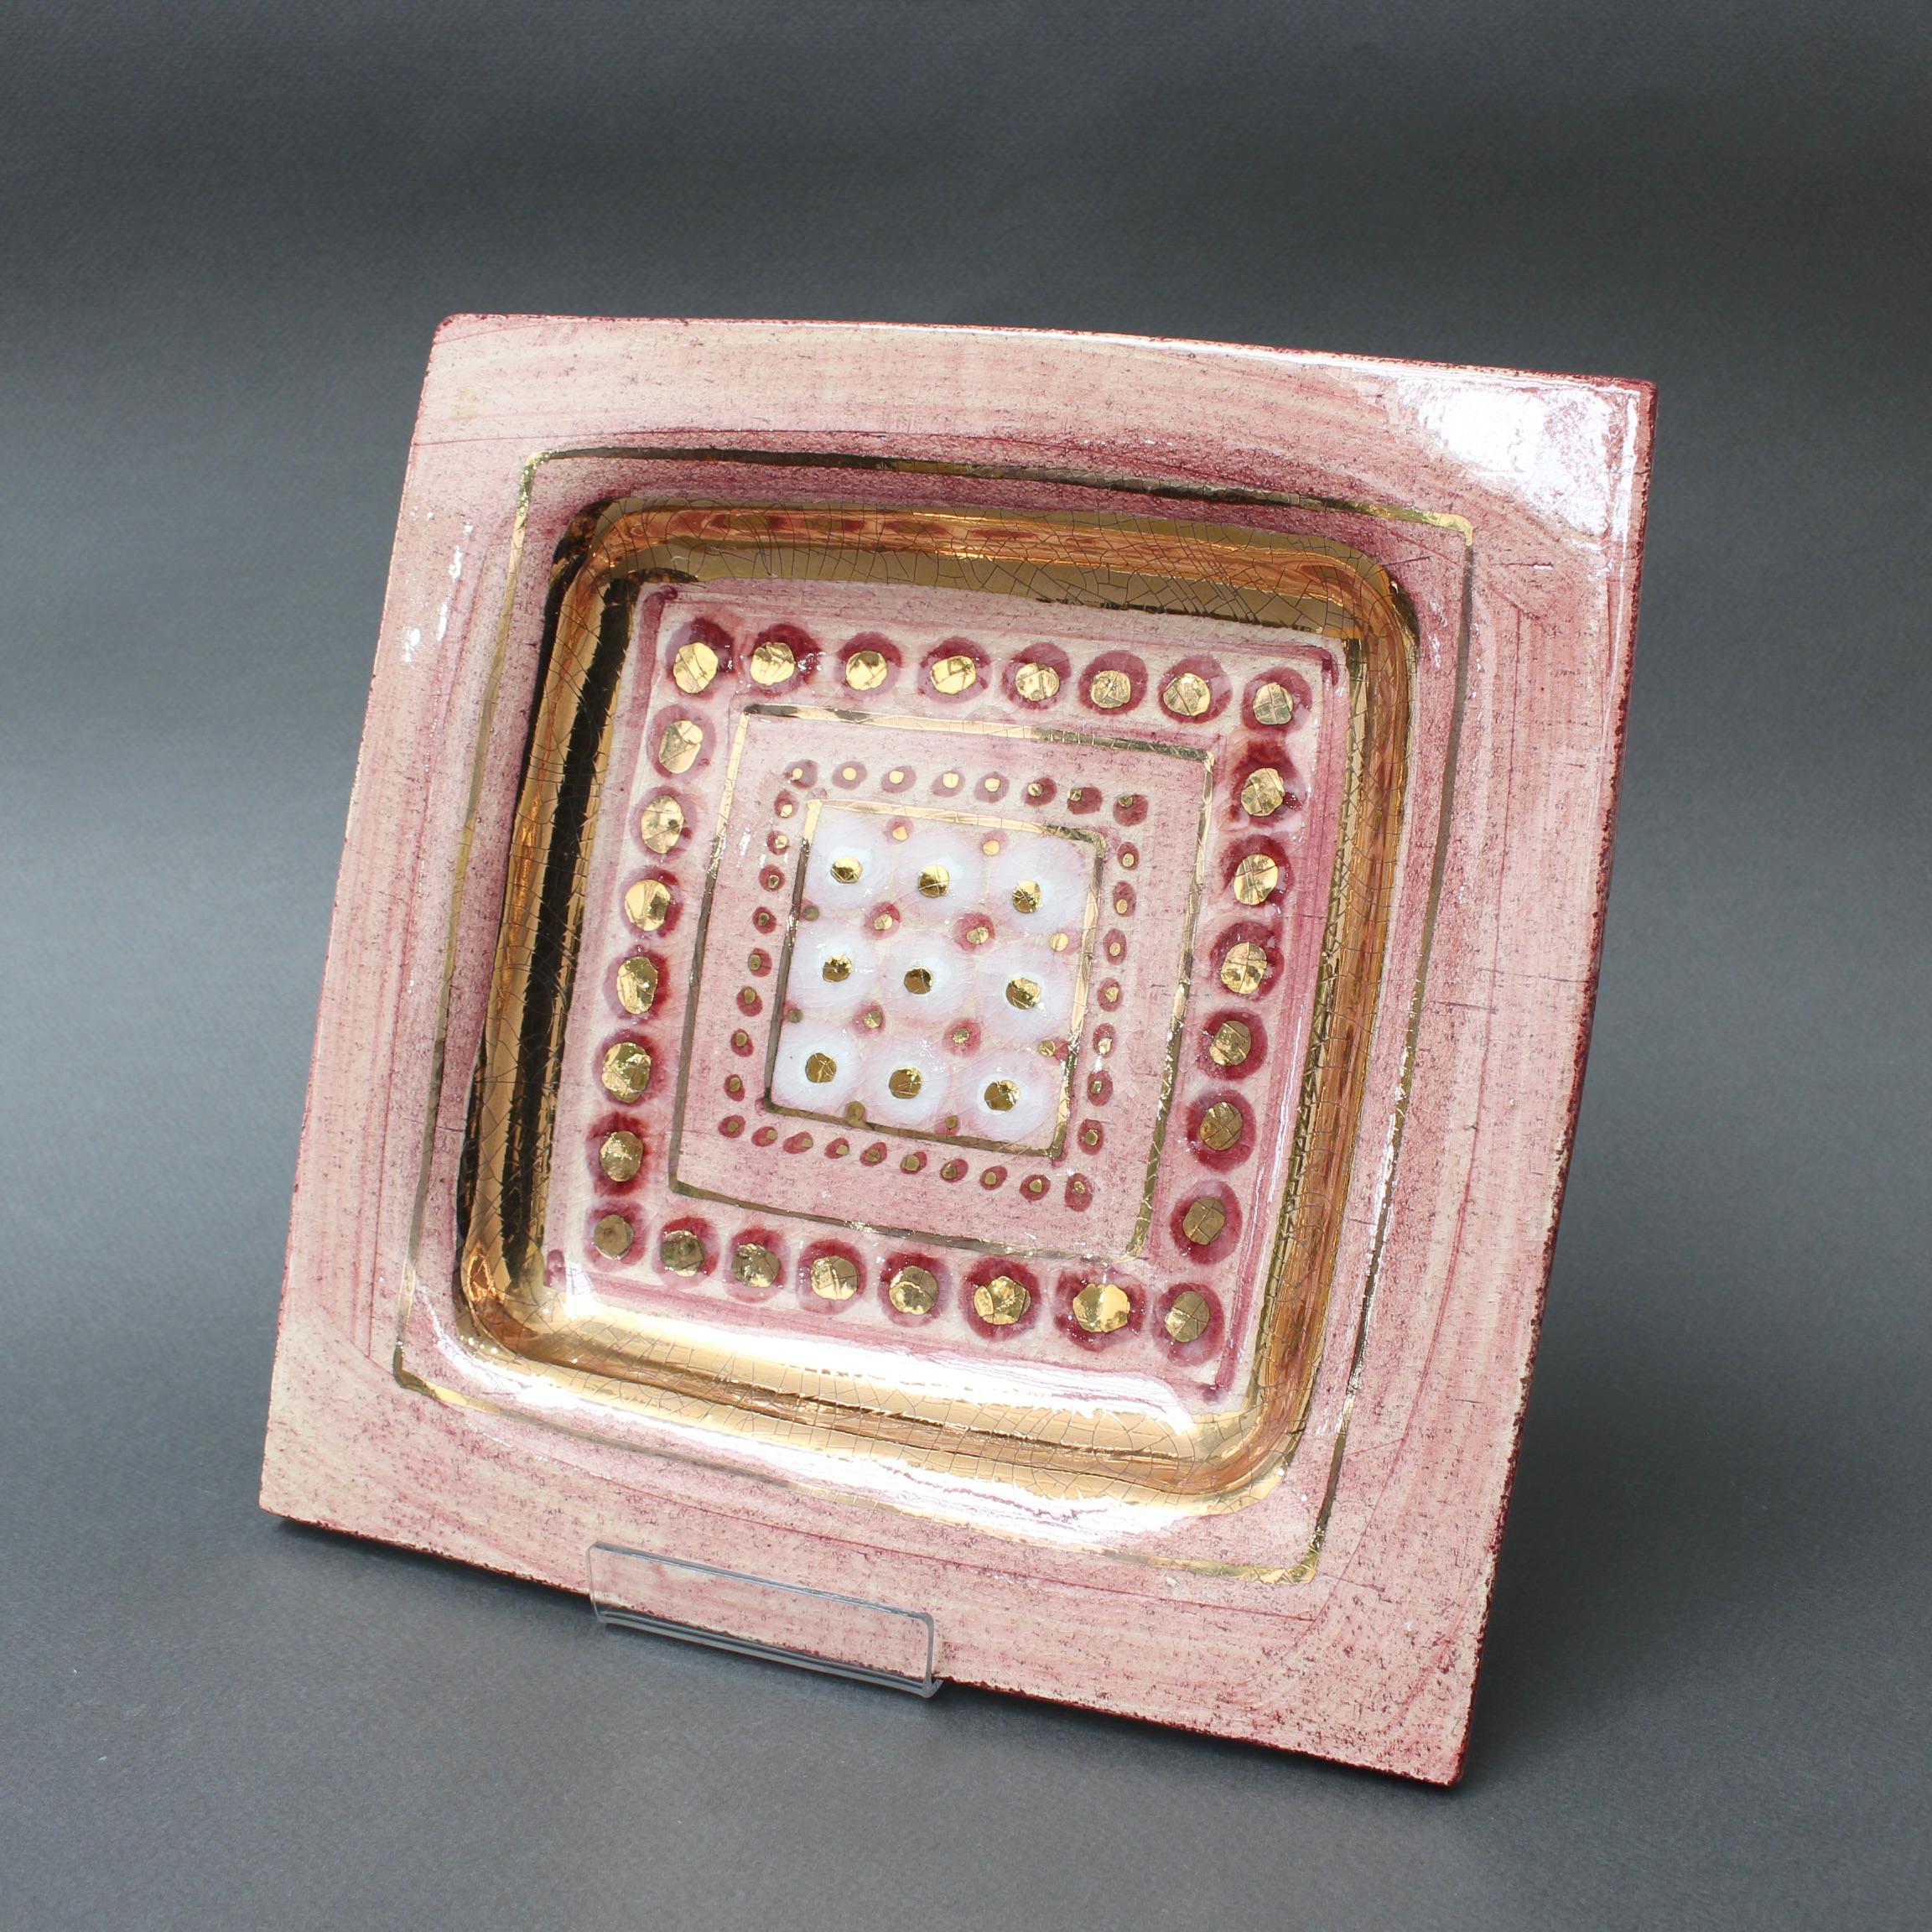 French pink decorative plate by ceramicist Georges Pelletier, (circa 1970s). Handmade, ceramic with crimson trim and gold-lustre craquelure. The sunken base of the square presents a series of gold geometric shapes in a repeating square pattern. The